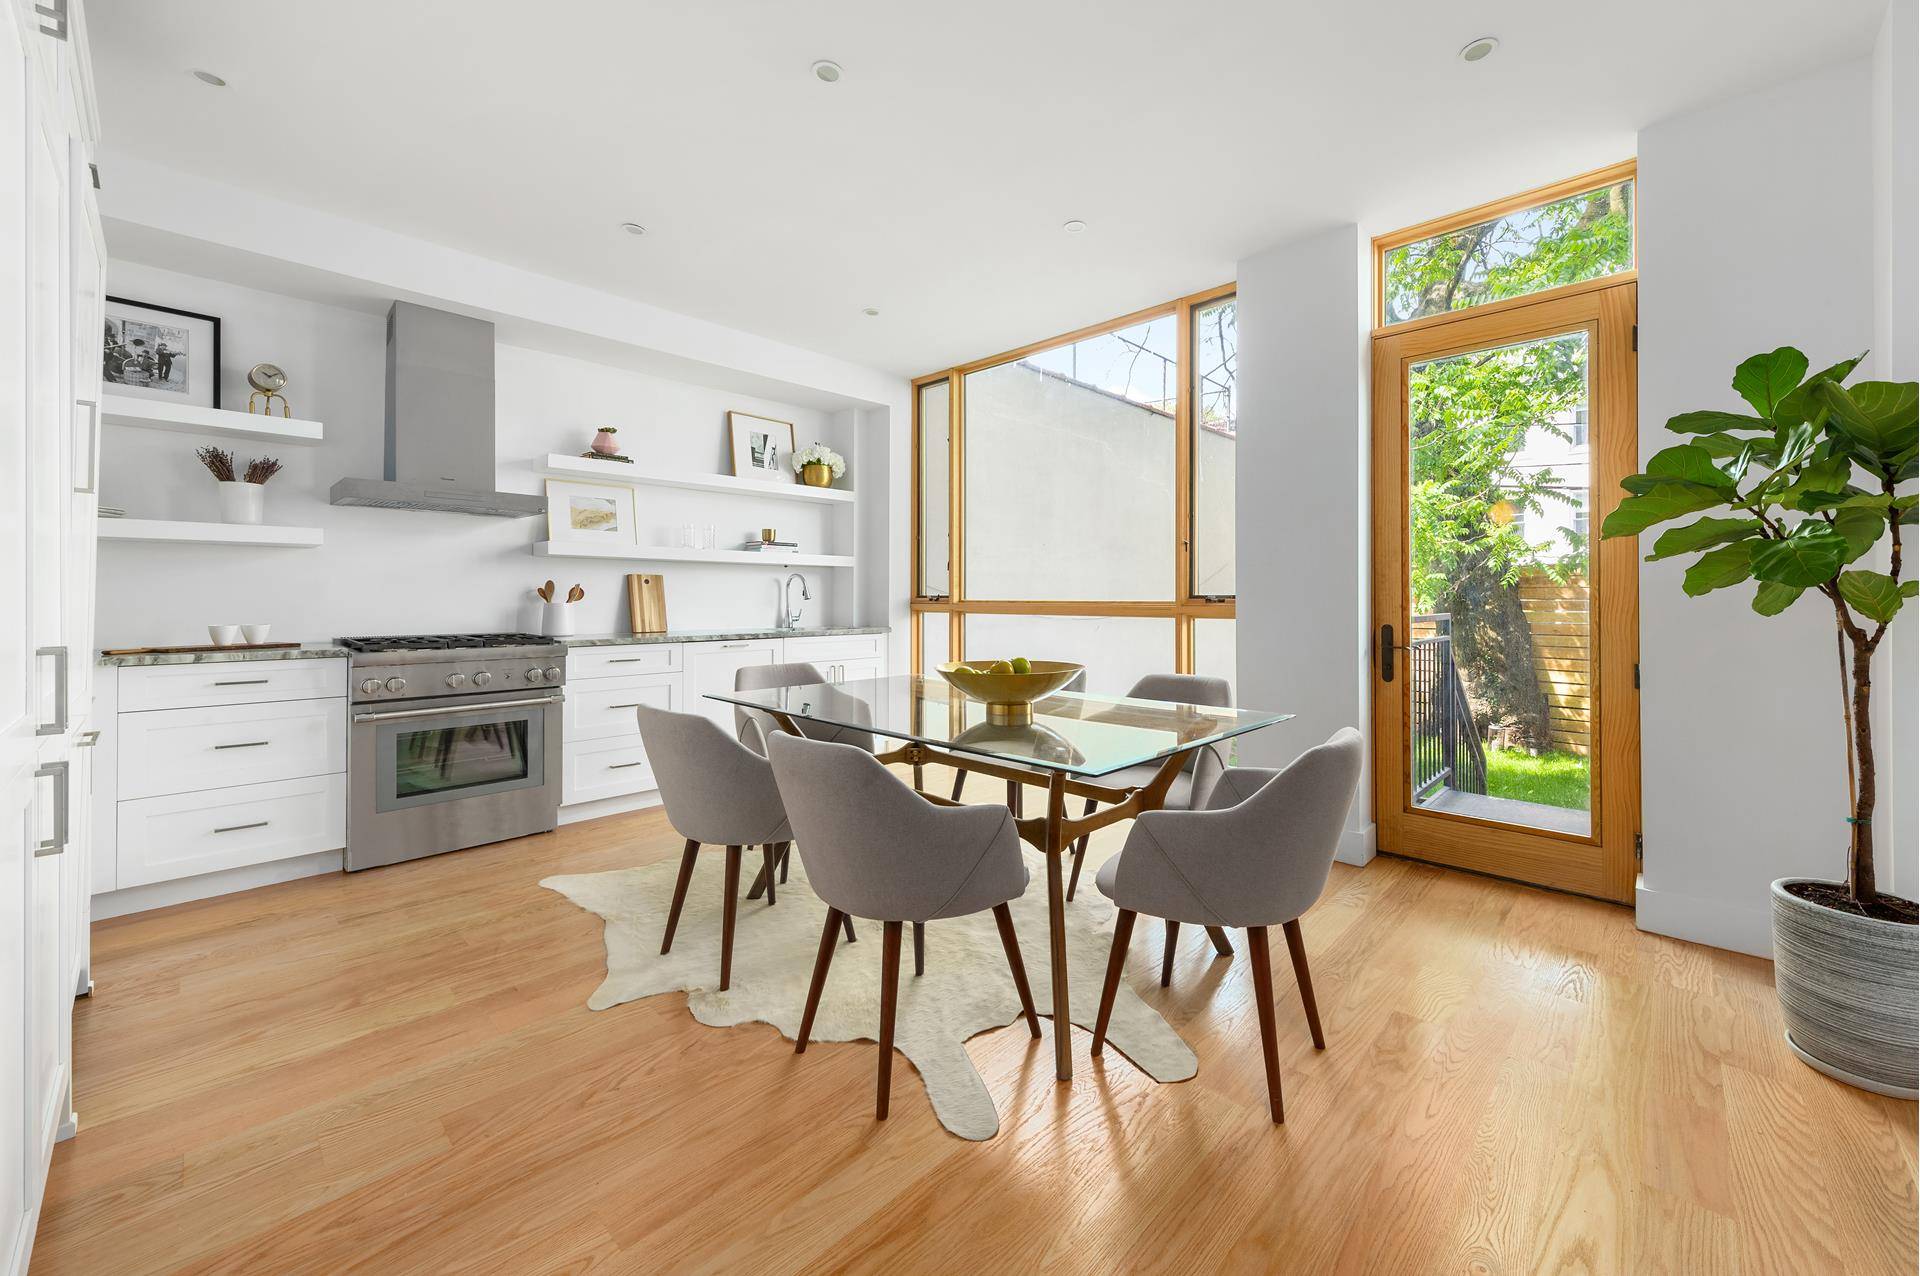 A gorgeous new boutique condominium situated ideally between charming brownstone enclave Carroll Gardens and eclectic Gowanus, 85 Third Street is ready to call home.